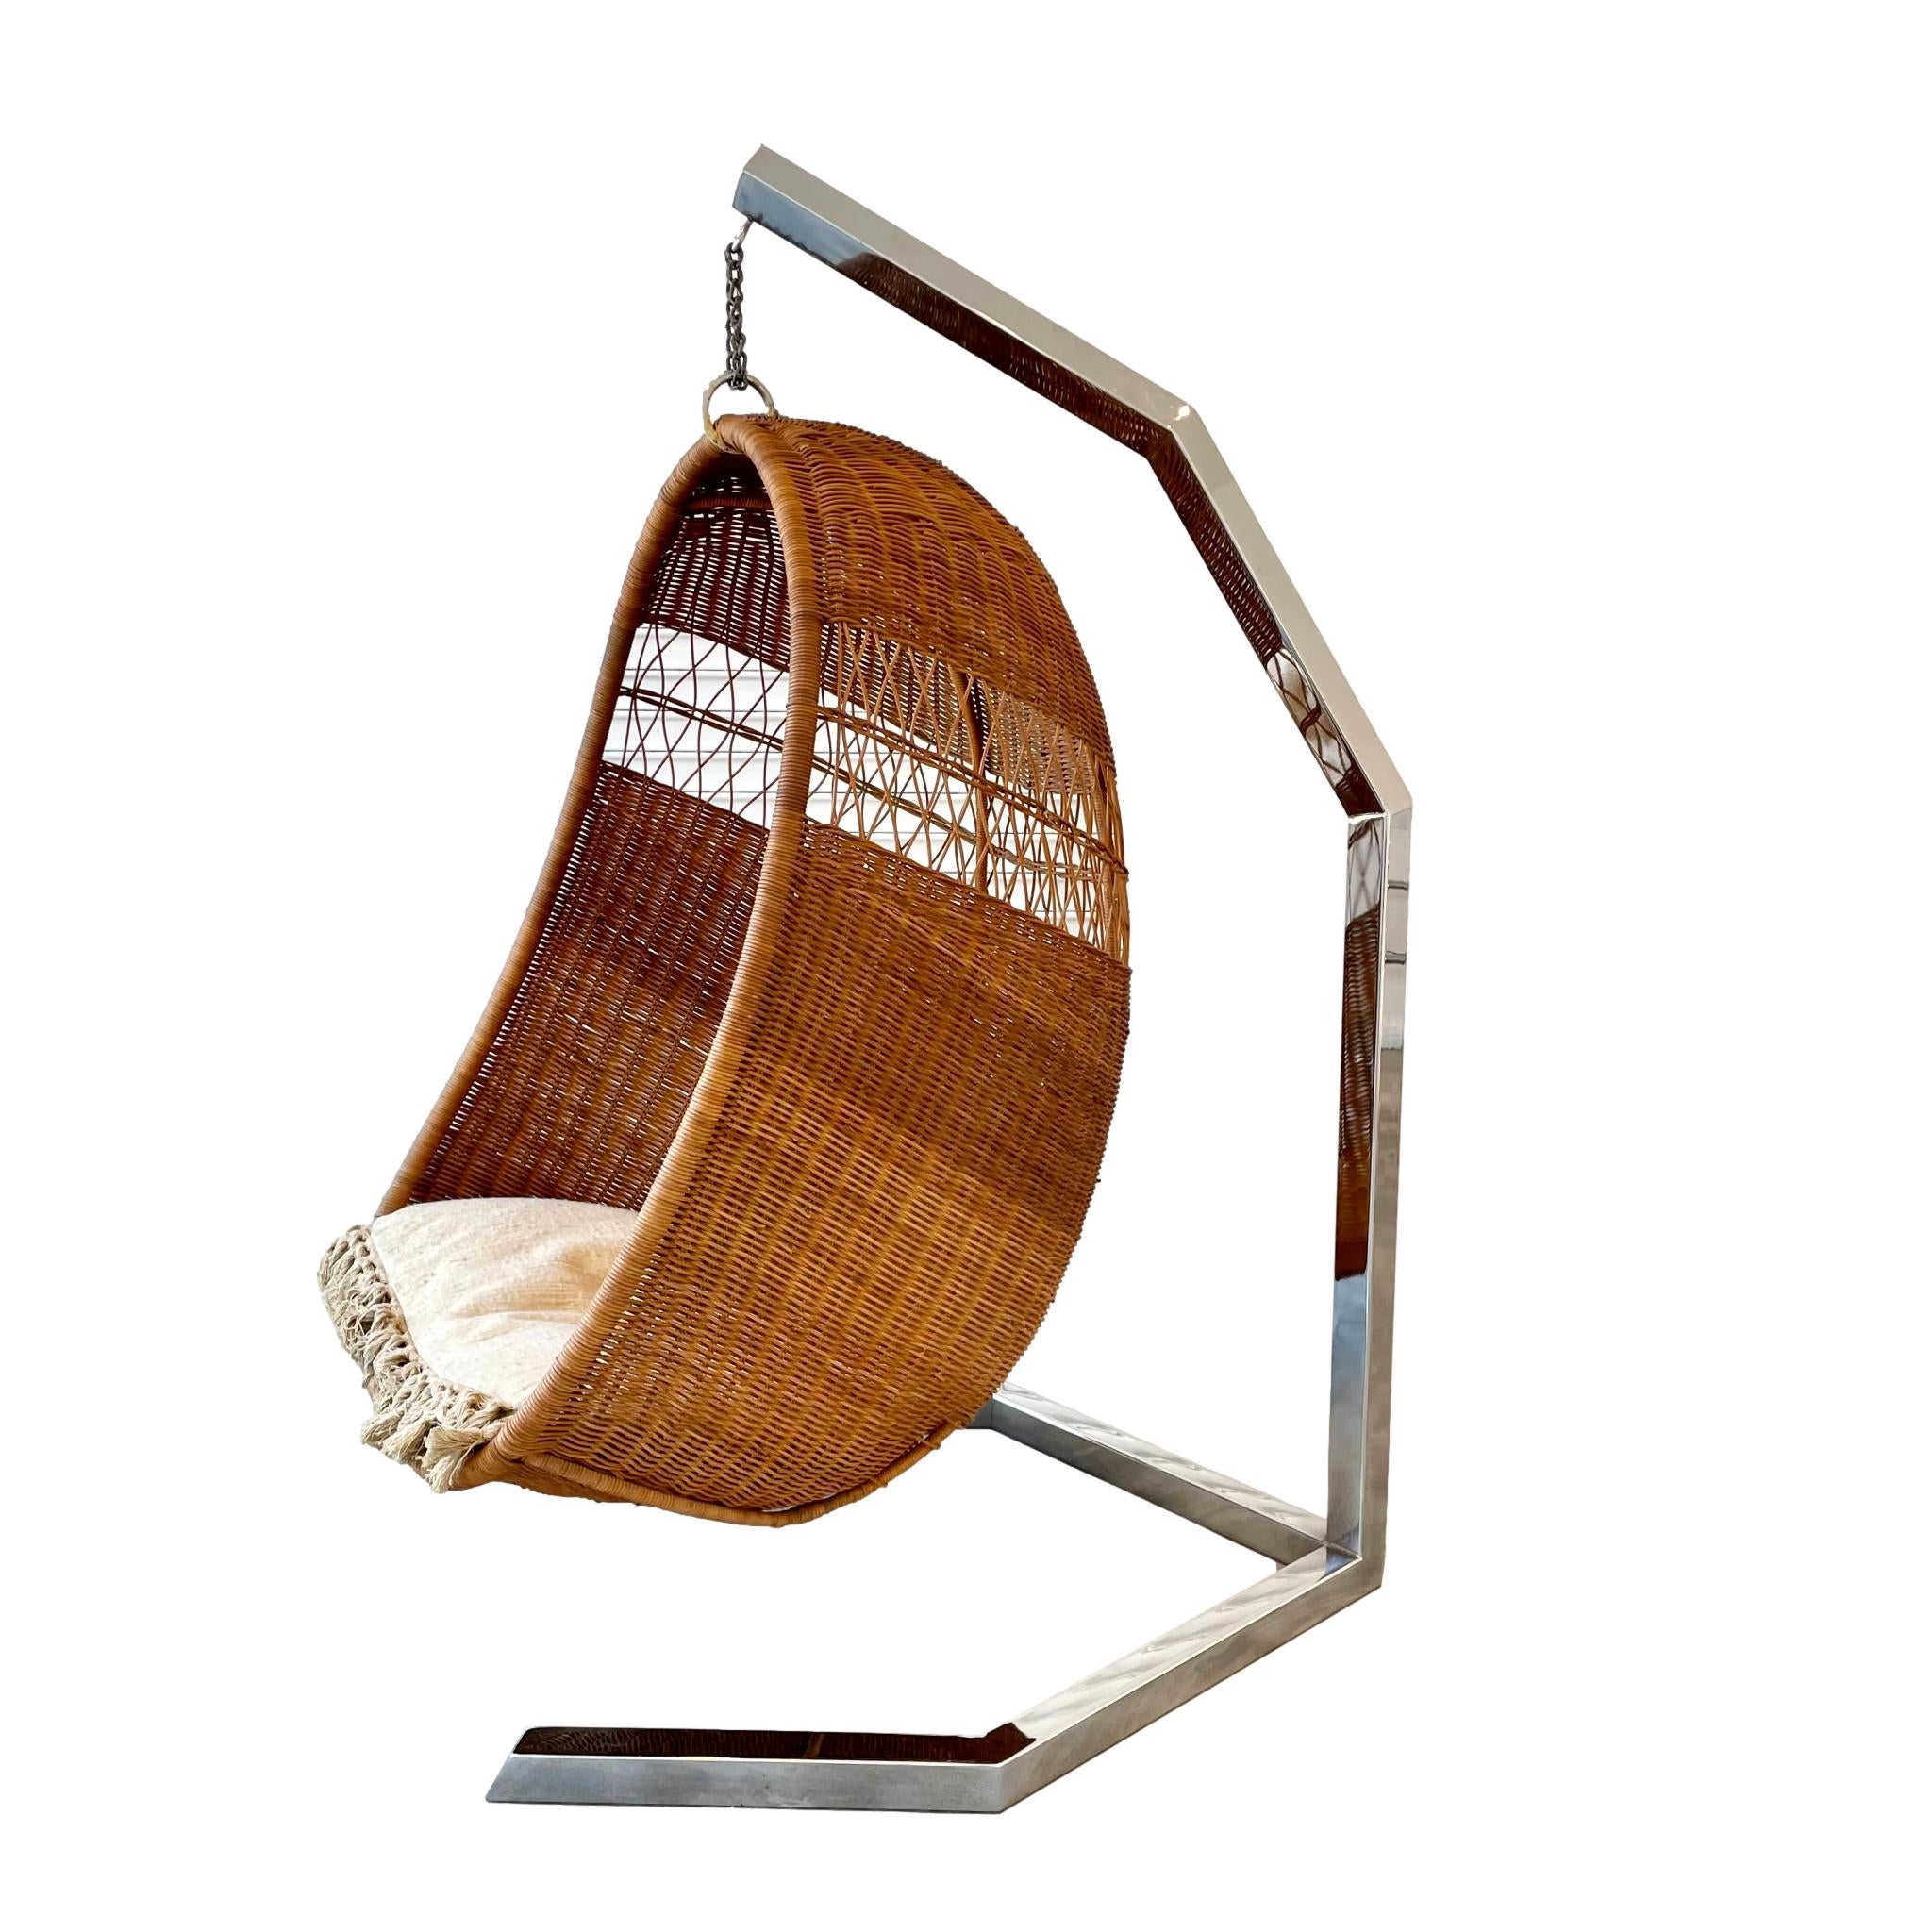 1970s Rattan and Wicker Hanging Chair on Chrome Stand